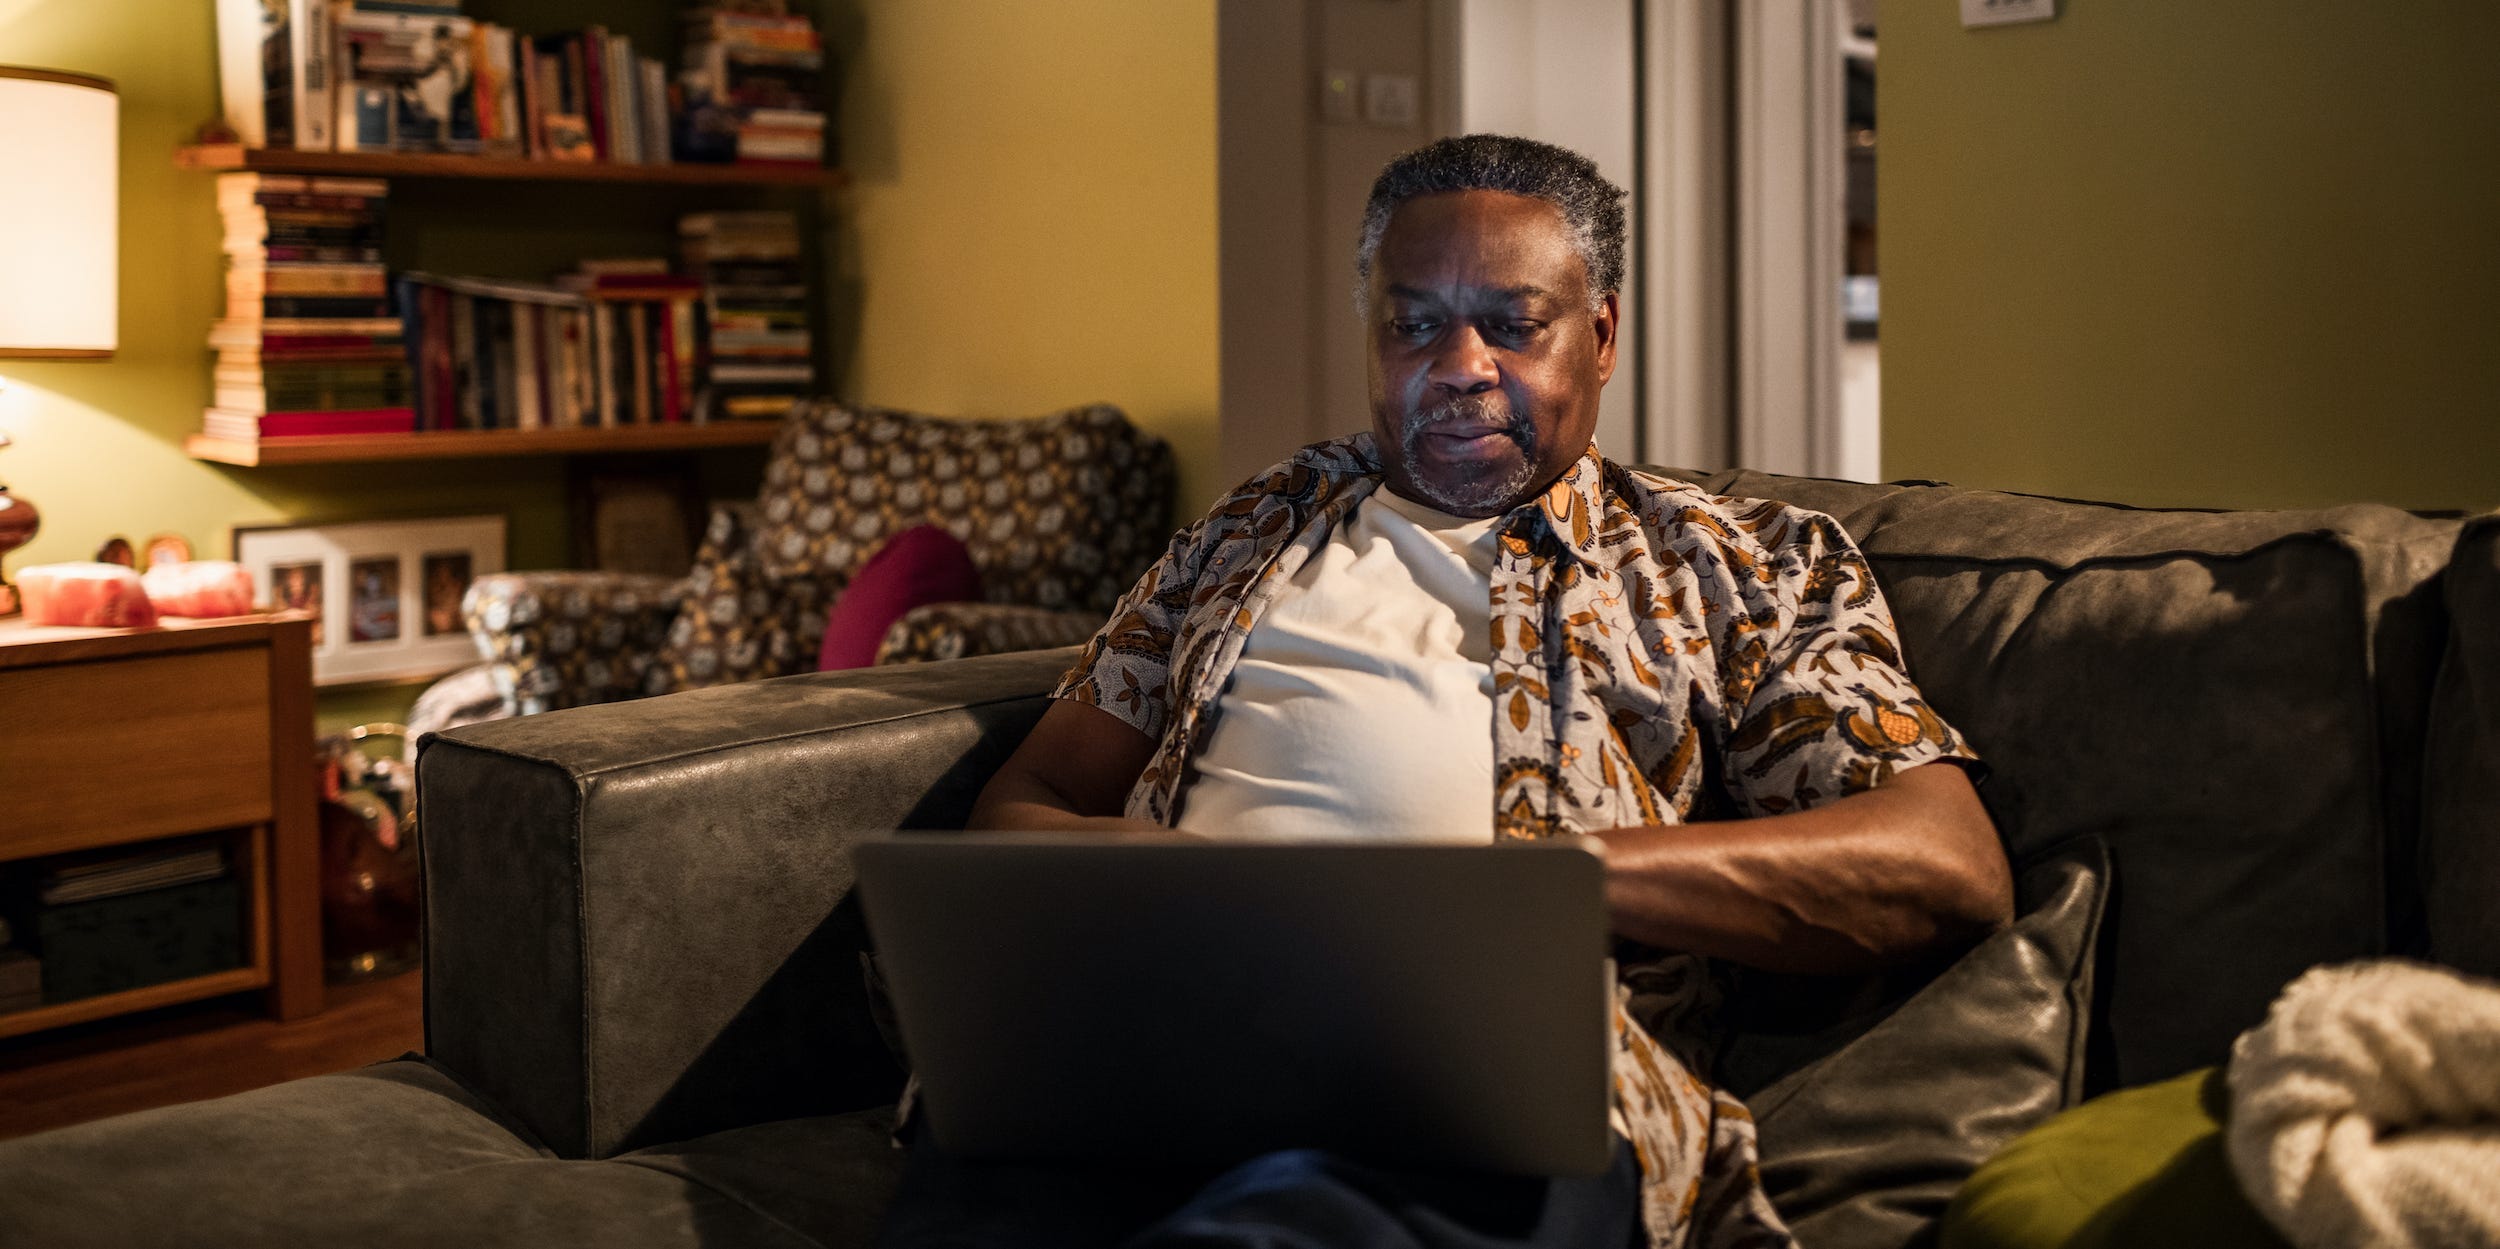 senior man looking at laptop on couch at home